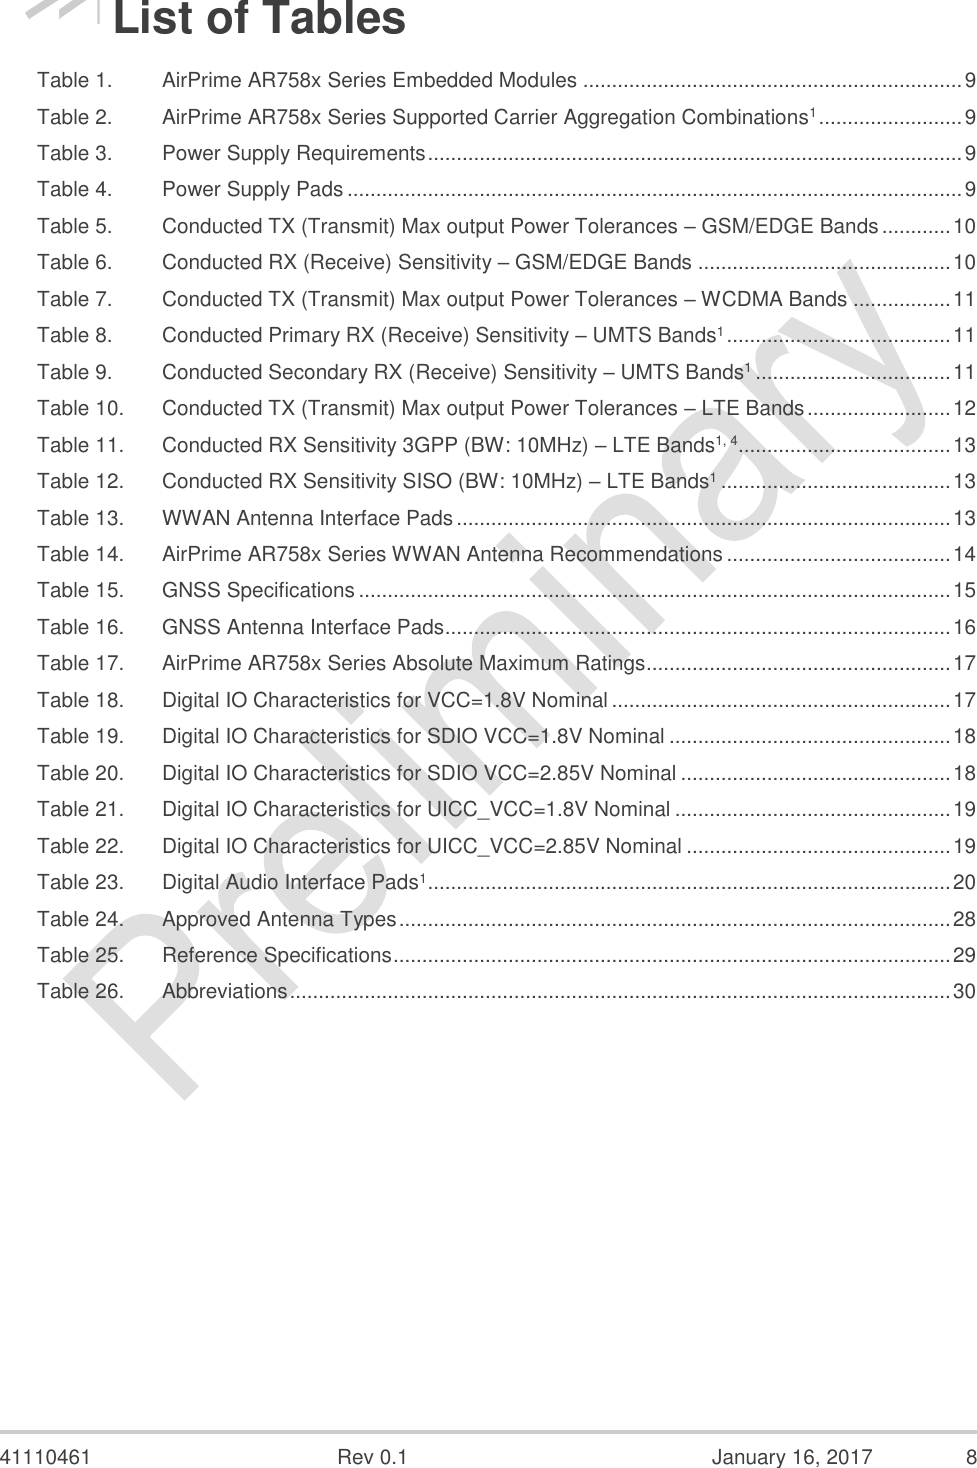  41110461  Rev 0.1  January 16, 2017  8 List of Tables Table 1. AirPrime AR758x Series Embedded Modules .................................................................. 9 Table 2. AirPrime AR758x Series Supported Carrier Aggregation Combinations1 ......................... 9 Table 3. Power Supply Requirements ............................................................................................. 9 Table 4. Power Supply Pads ........................................................................................................... 9 Table 5. Conducted TX (Transmit) Max output Power Tolerances – GSM/EDGE Bands ............ 10 Table 6. Conducted RX (Receive) Sensitivity – GSM/EDGE Bands ............................................ 10 Table 7. Conducted TX (Transmit) Max output Power Tolerances – WCDMA Bands ................. 11 Table 8. Conducted Primary RX (Receive) Sensitivity – UMTS Bands1 ....................................... 11 Table 9. Conducted Secondary RX (Receive) Sensitivity – UMTS Bands1 .................................. 11 Table 10. Conducted TX (Transmit) Max output Power Tolerances – LTE Bands ......................... 12 Table 11. Conducted RX Sensitivity 3GPP (BW: 10MHz) – LTE Bands1, 4..................................... 13 Table 12. Conducted RX Sensitivity SISO (BW: 10MHz) – LTE Bands1 ........................................ 13 Table 13. WWAN Antenna Interface Pads ...................................................................................... 13 Table 14. AirPrime AR758x Series WWAN Antenna Recommendations ....................................... 14 Table 15. GNSS Specifications ....................................................................................................... 15 Table 16. GNSS Antenna Interface Pads ........................................................................................ 16 Table 17. AirPrime AR758x Series Absolute Maximum Ratings..................................................... 17 Table 18. Digital IO Characteristics for VCC=1.8V Nominal ........................................................... 17 Table 19. Digital IO Characteristics for SDIO VCC=1.8V Nominal ................................................. 18 Table 20. Digital IO Characteristics for SDIO VCC=2.85V Nominal ............................................... 18 Table 21. Digital IO Characteristics for UICC_VCC=1.8V Nominal ................................................ 19 Table 22. Digital IO Characteristics for UICC_VCC=2.85V Nominal .............................................. 19 Table 23. Digital Audio Interface Pads1 ........................................................................................... 20 Table 24. Approved Antenna Types ................................................................................................ 28 Table 25. Reference Specifications ................................................................................................. 29 Table 26. Abbreviations ................................................................................................................... 30  